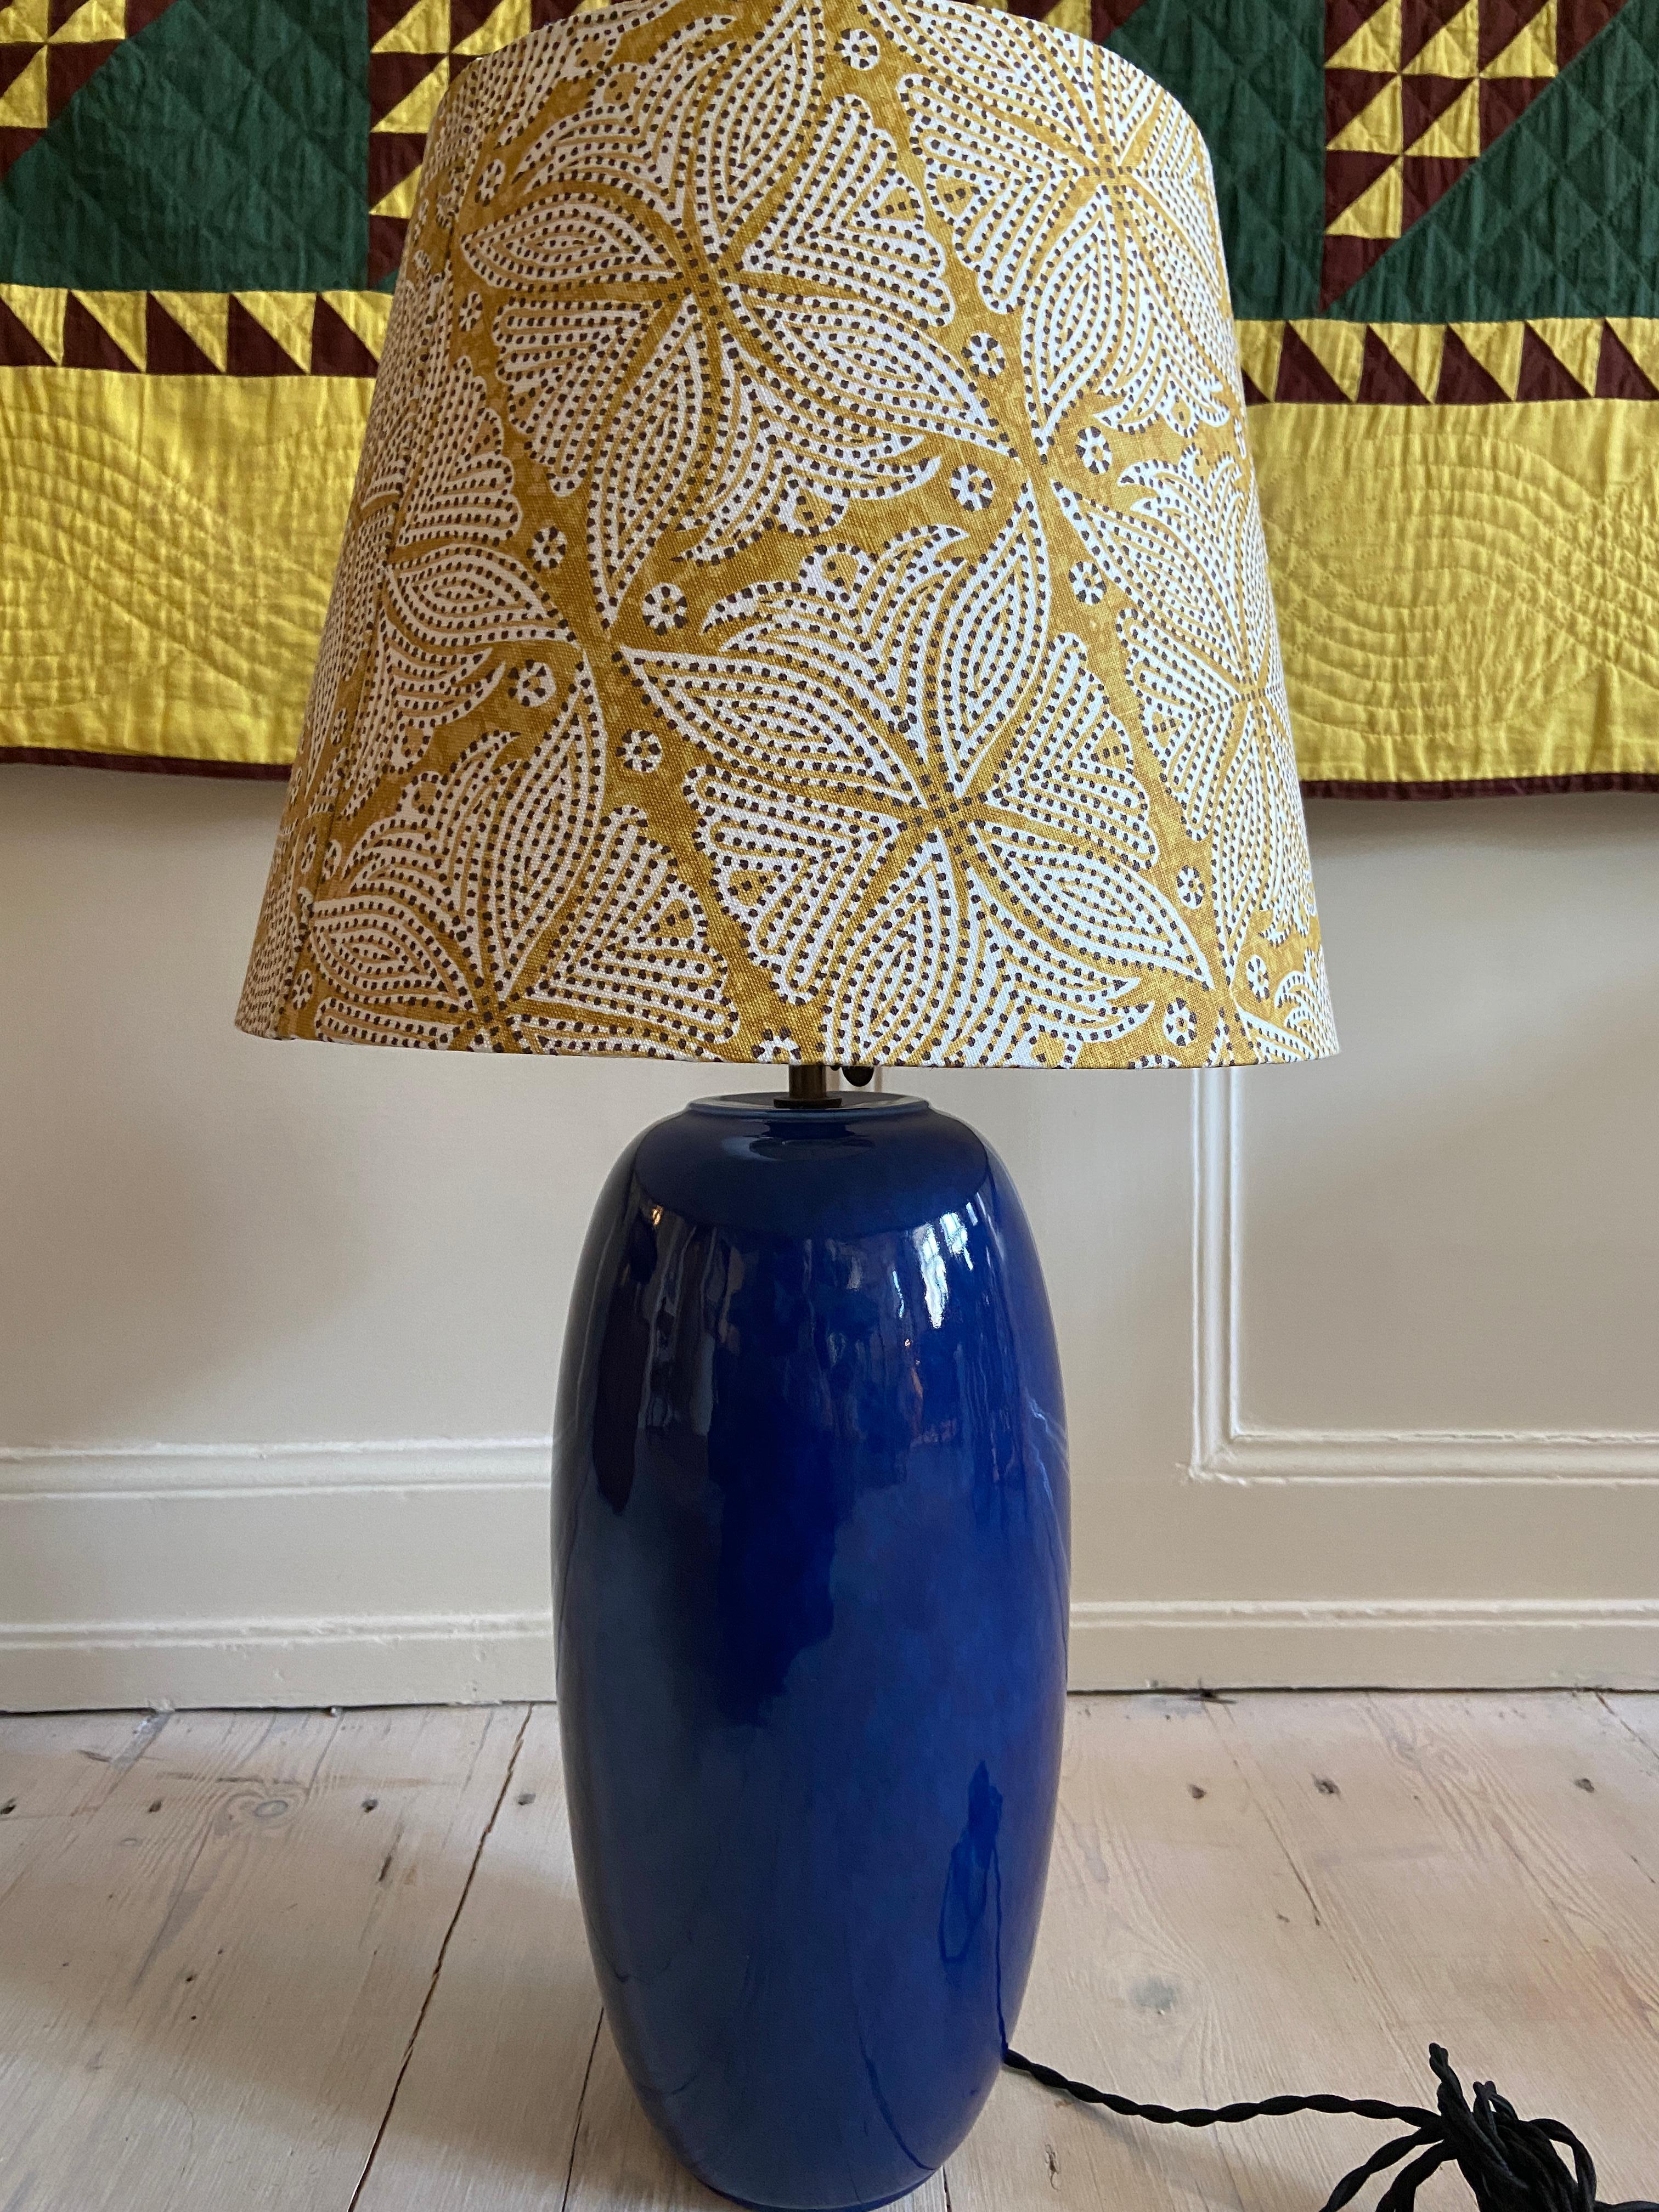 France, 1970's

Ceramic table lamp with blue glaze and customized shade by The Apartment.

Measures: H 68 x Ø 36 cm.